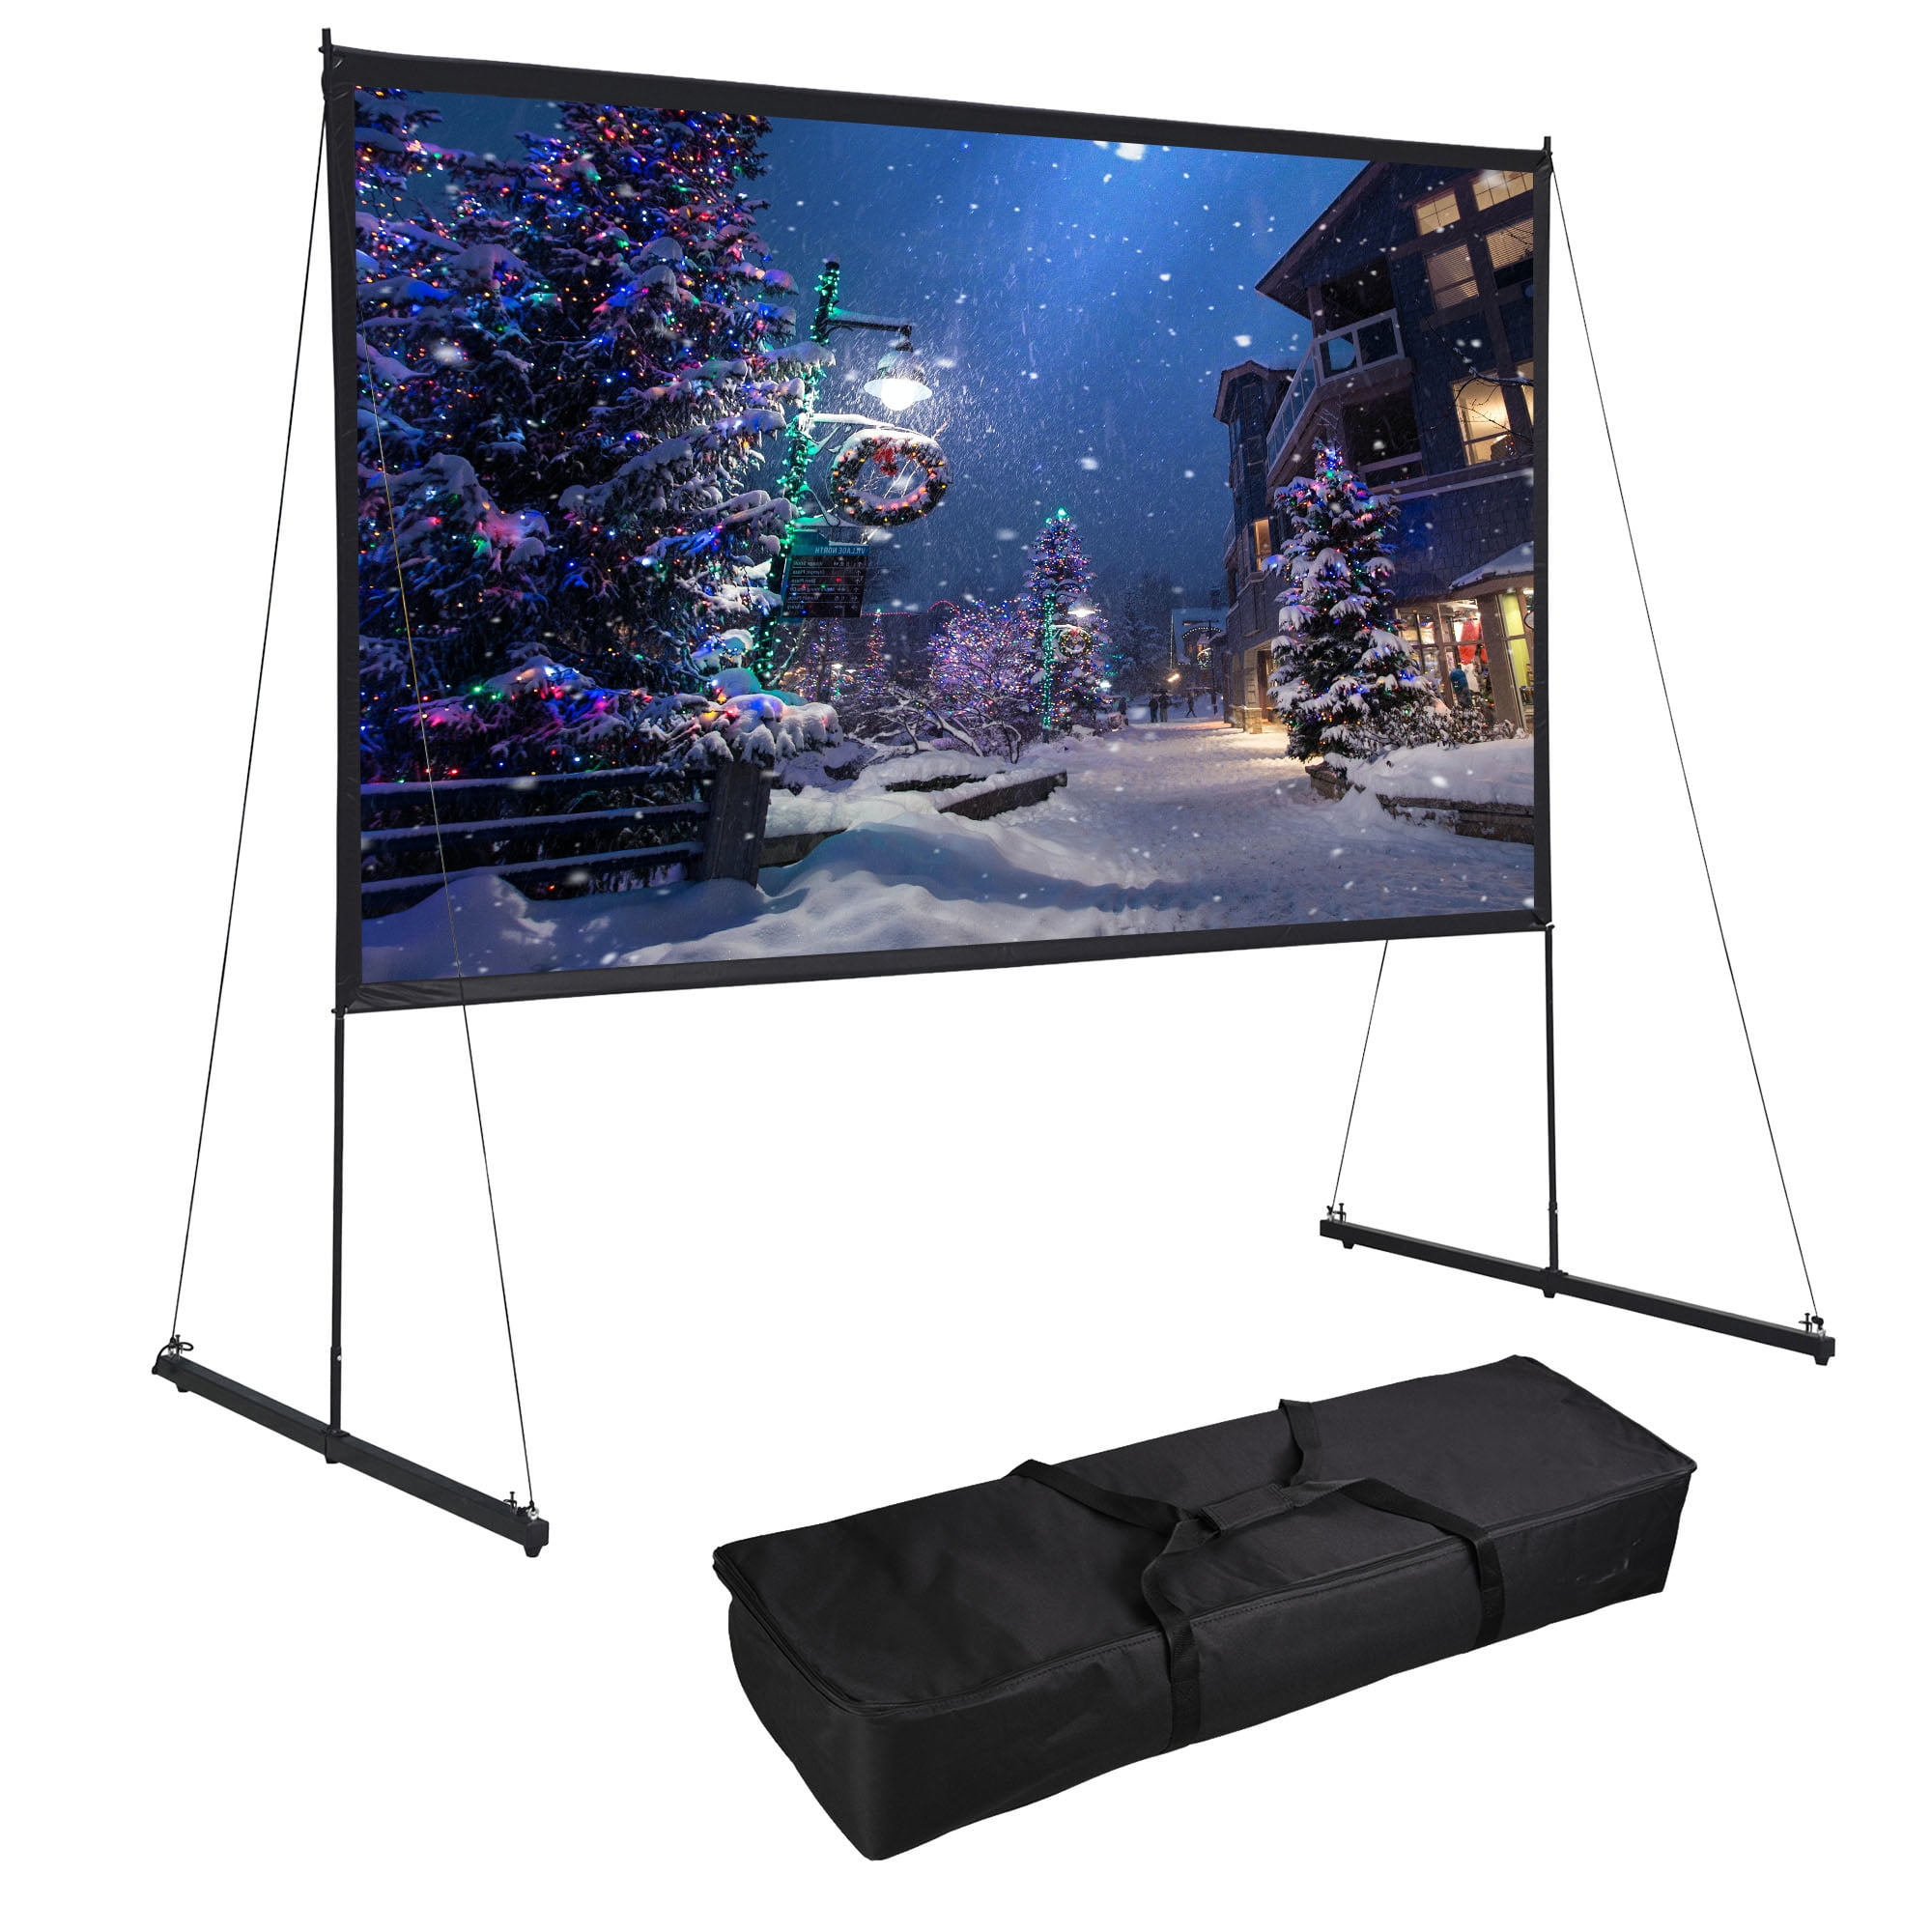 VANKYO Stay True Projector Screen with Stand, 100 Inches 160 